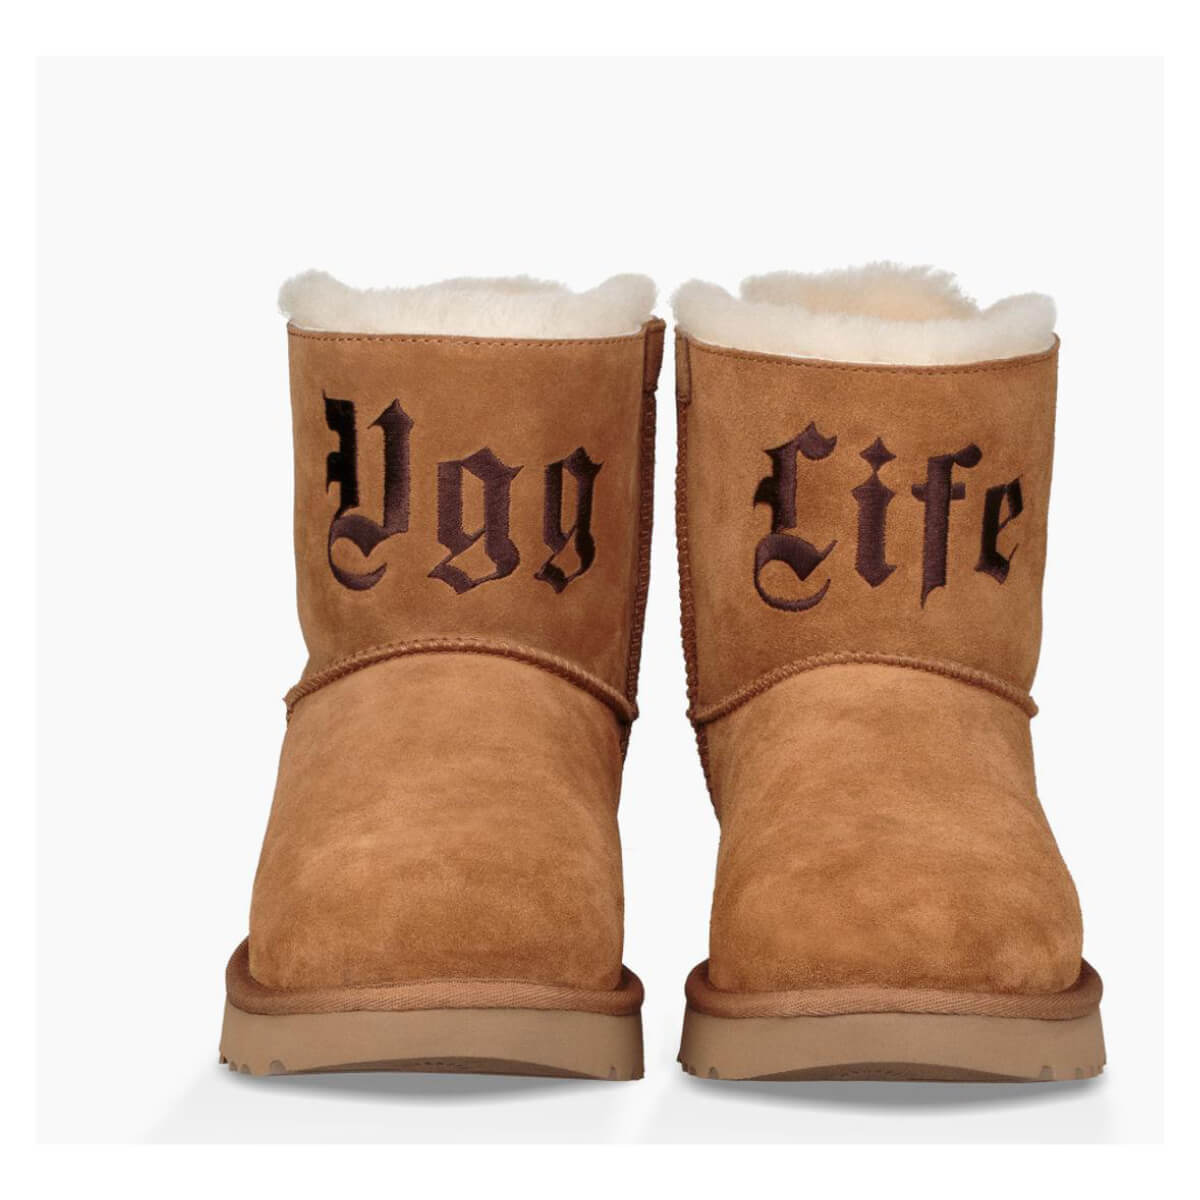 show me uggs